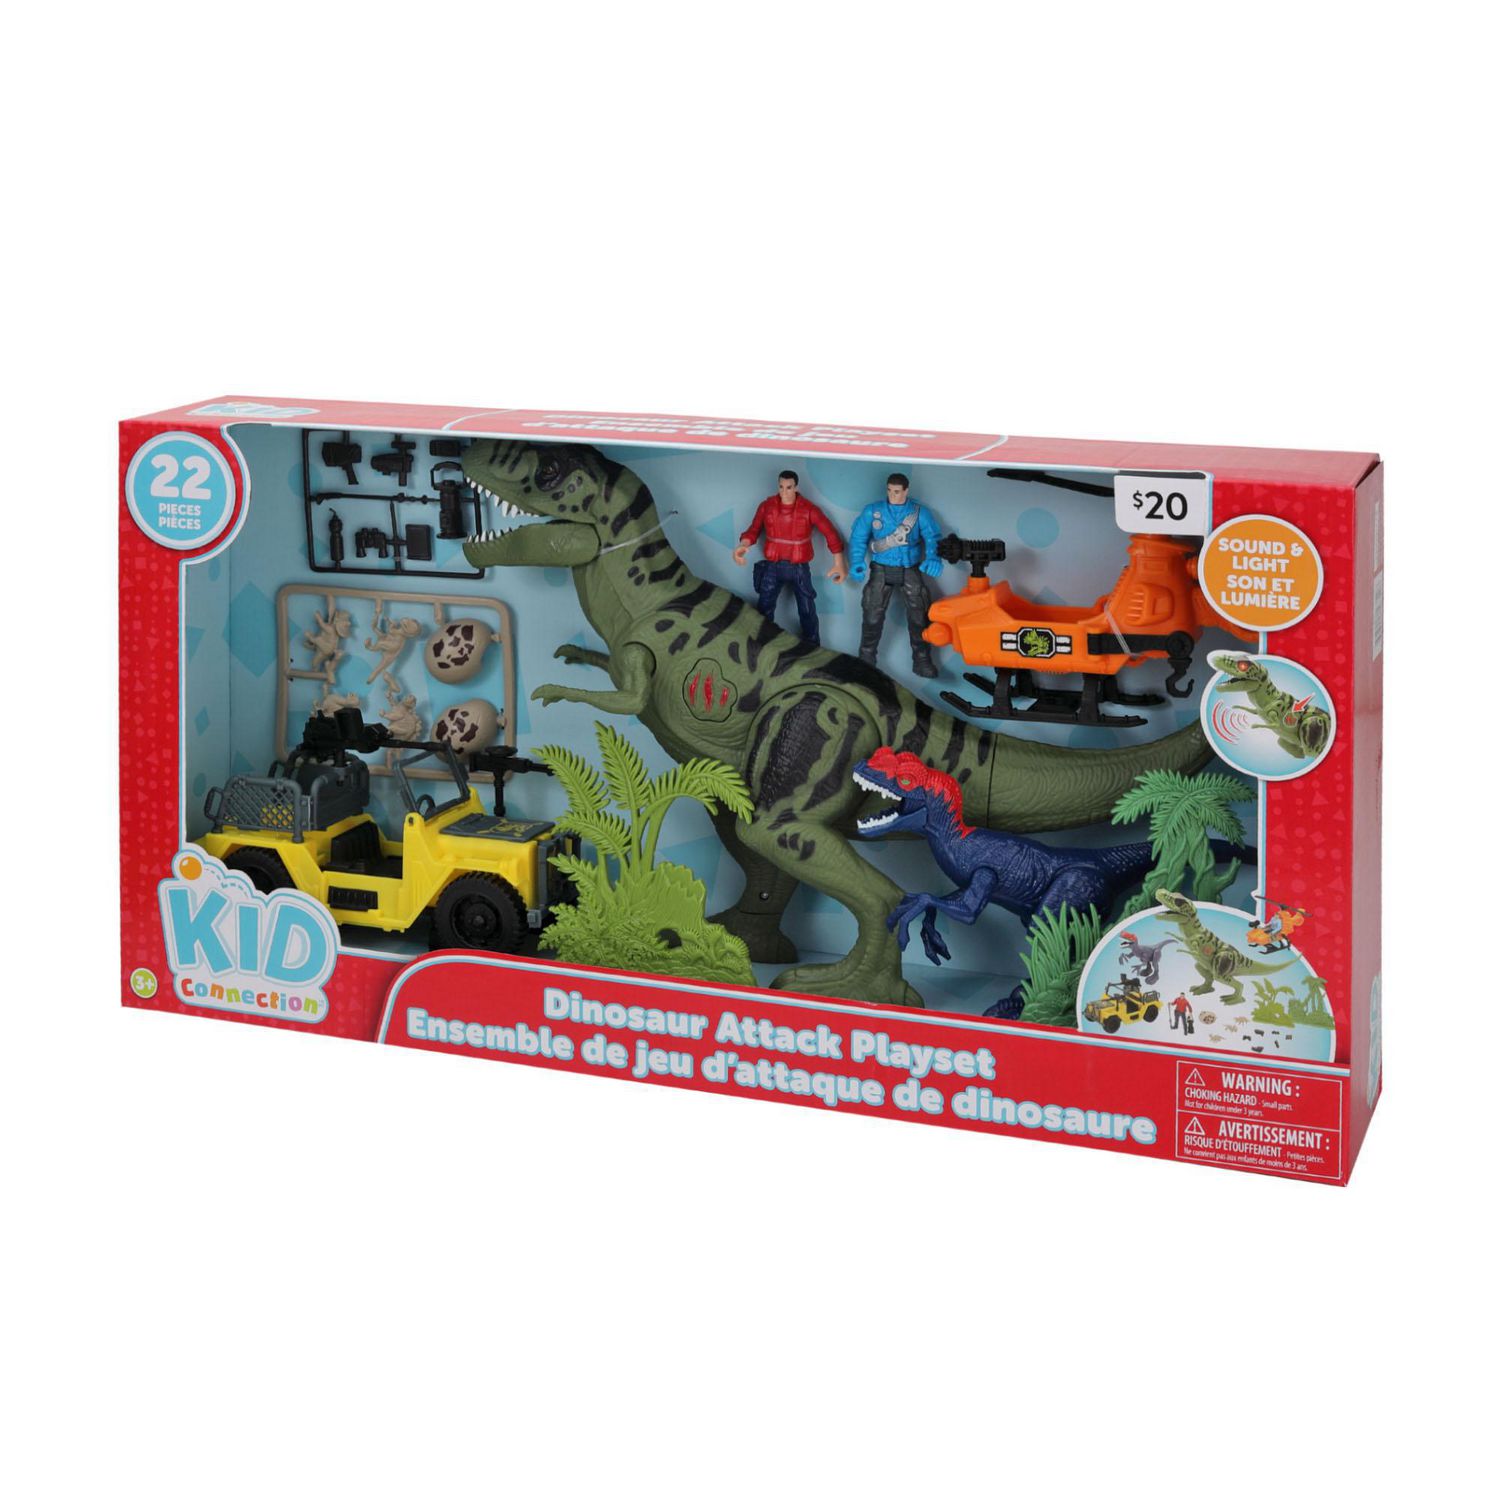 New Kid Connection Dinosaur Attack Play Set Light & Sound 22 Pieces Ages 3 